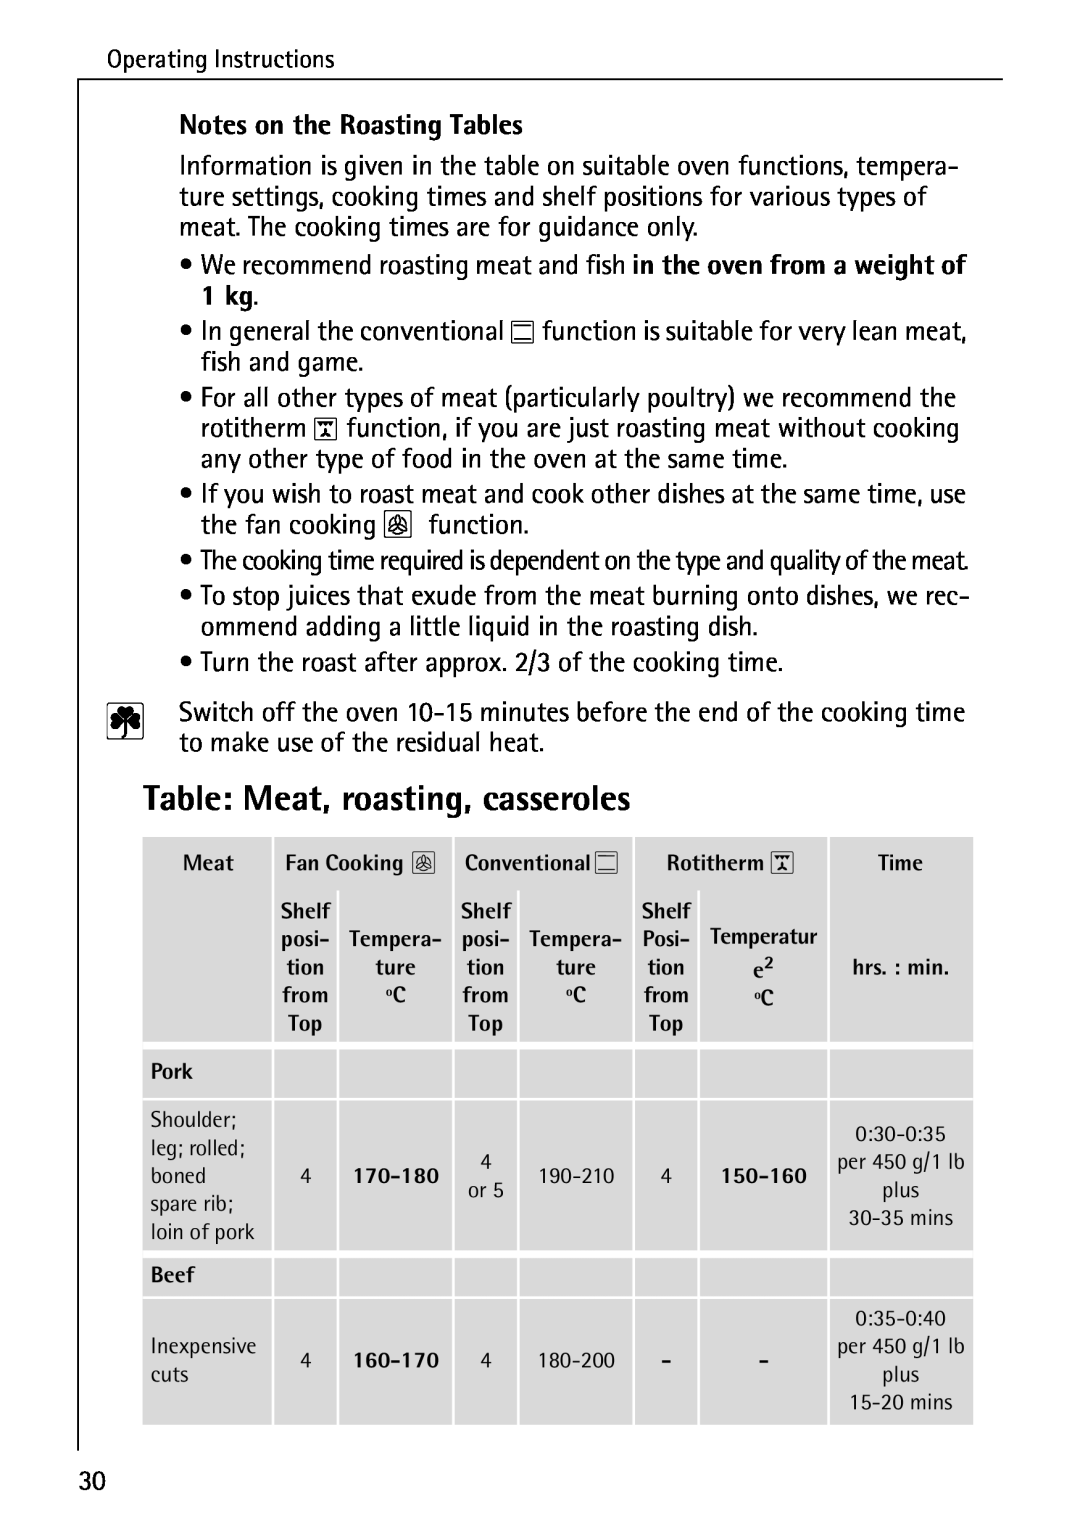 AEG B 4100 operating instructions Notes on the Roasting Tables, Table Meat, roasting, casseroles 